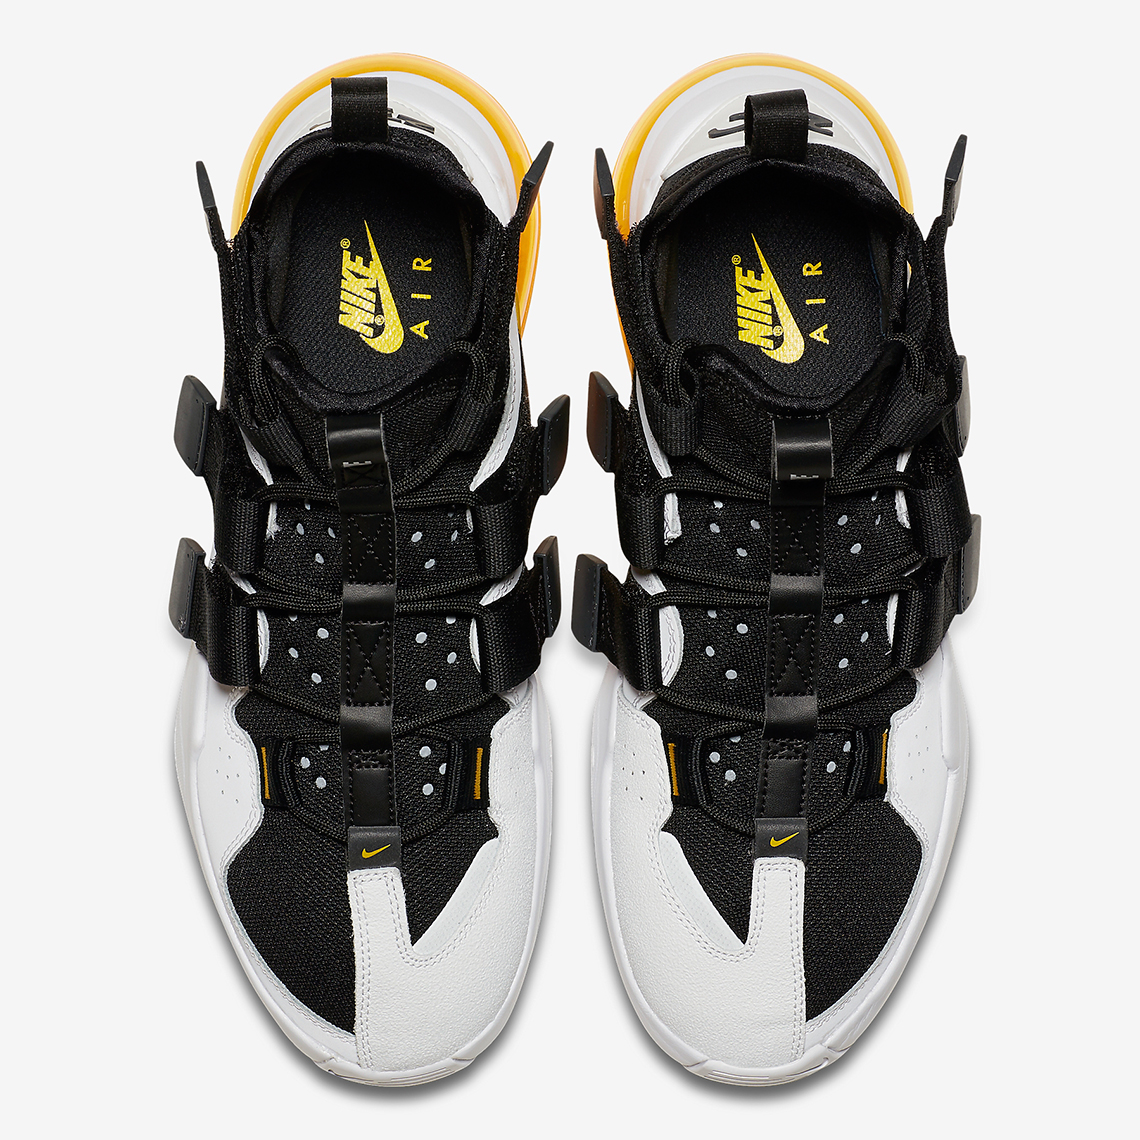 The Nike Air Edge 270 Goes Classic White And Black With Yellow Bubbles